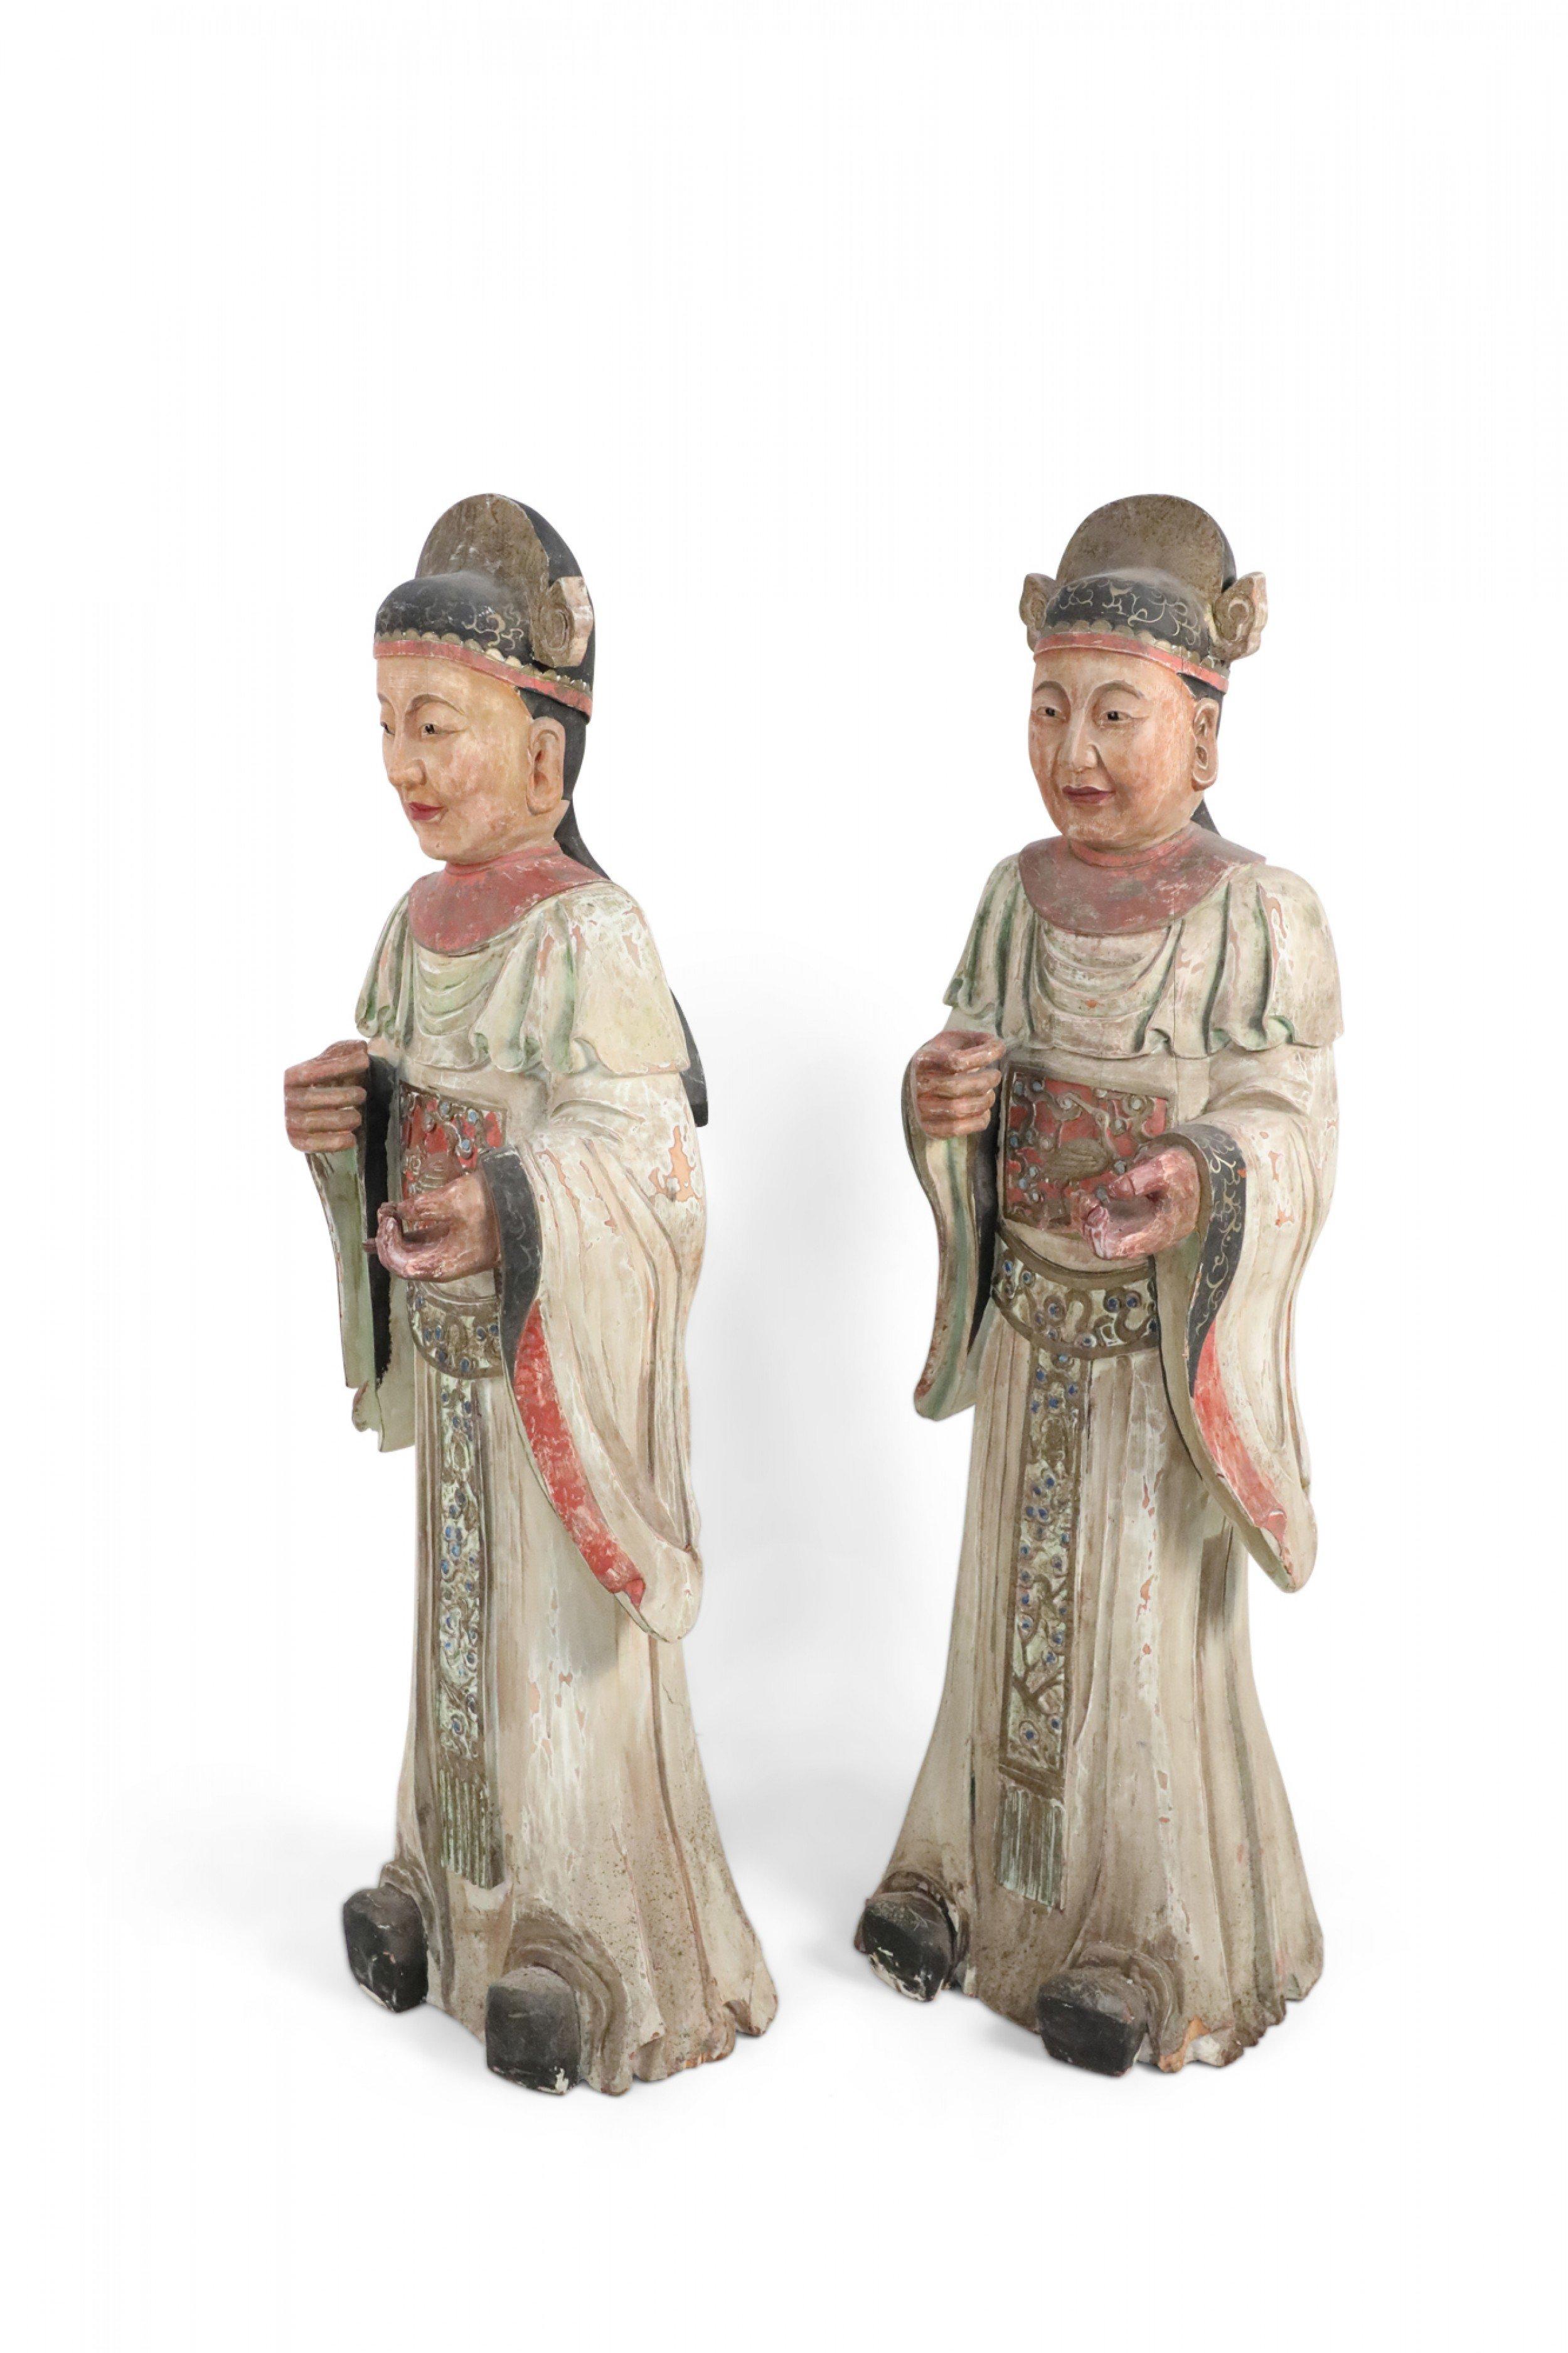 2 Chinese carved wooden statues of civil officers wearing white robes detailed with red trim, a red broad sash above the waste, and an ornate belt below the waste (priced each).
  